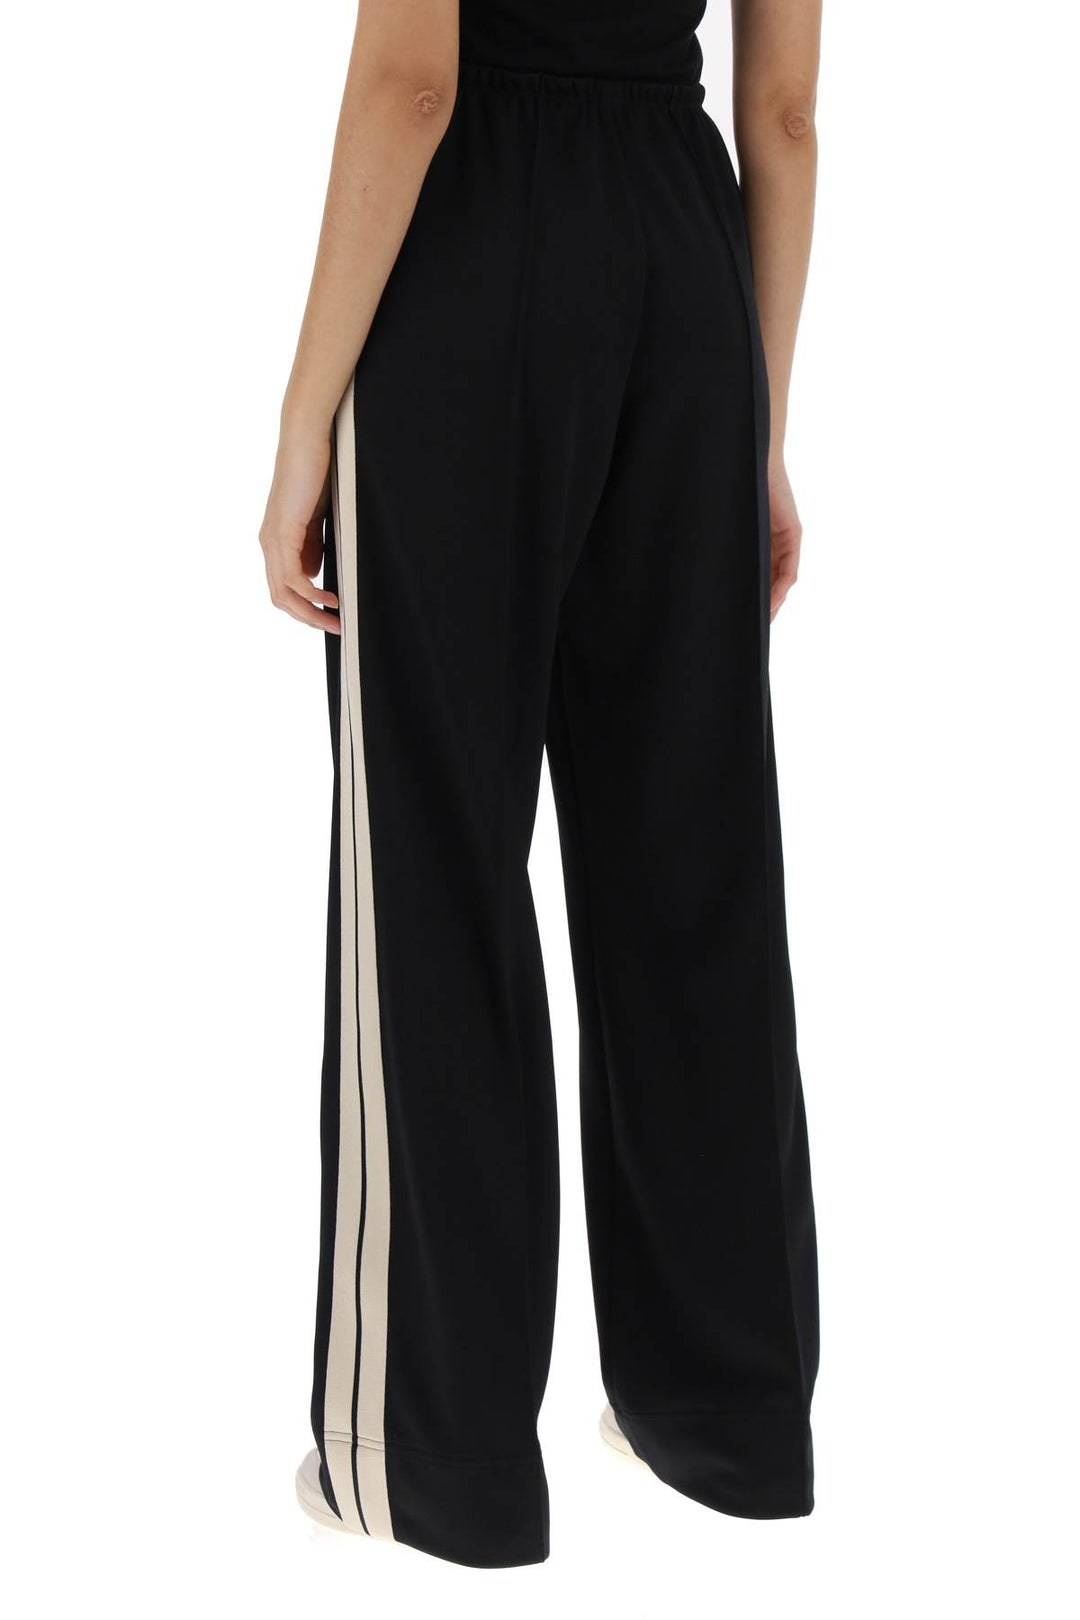 Palm angels track pants with contrast bands-2